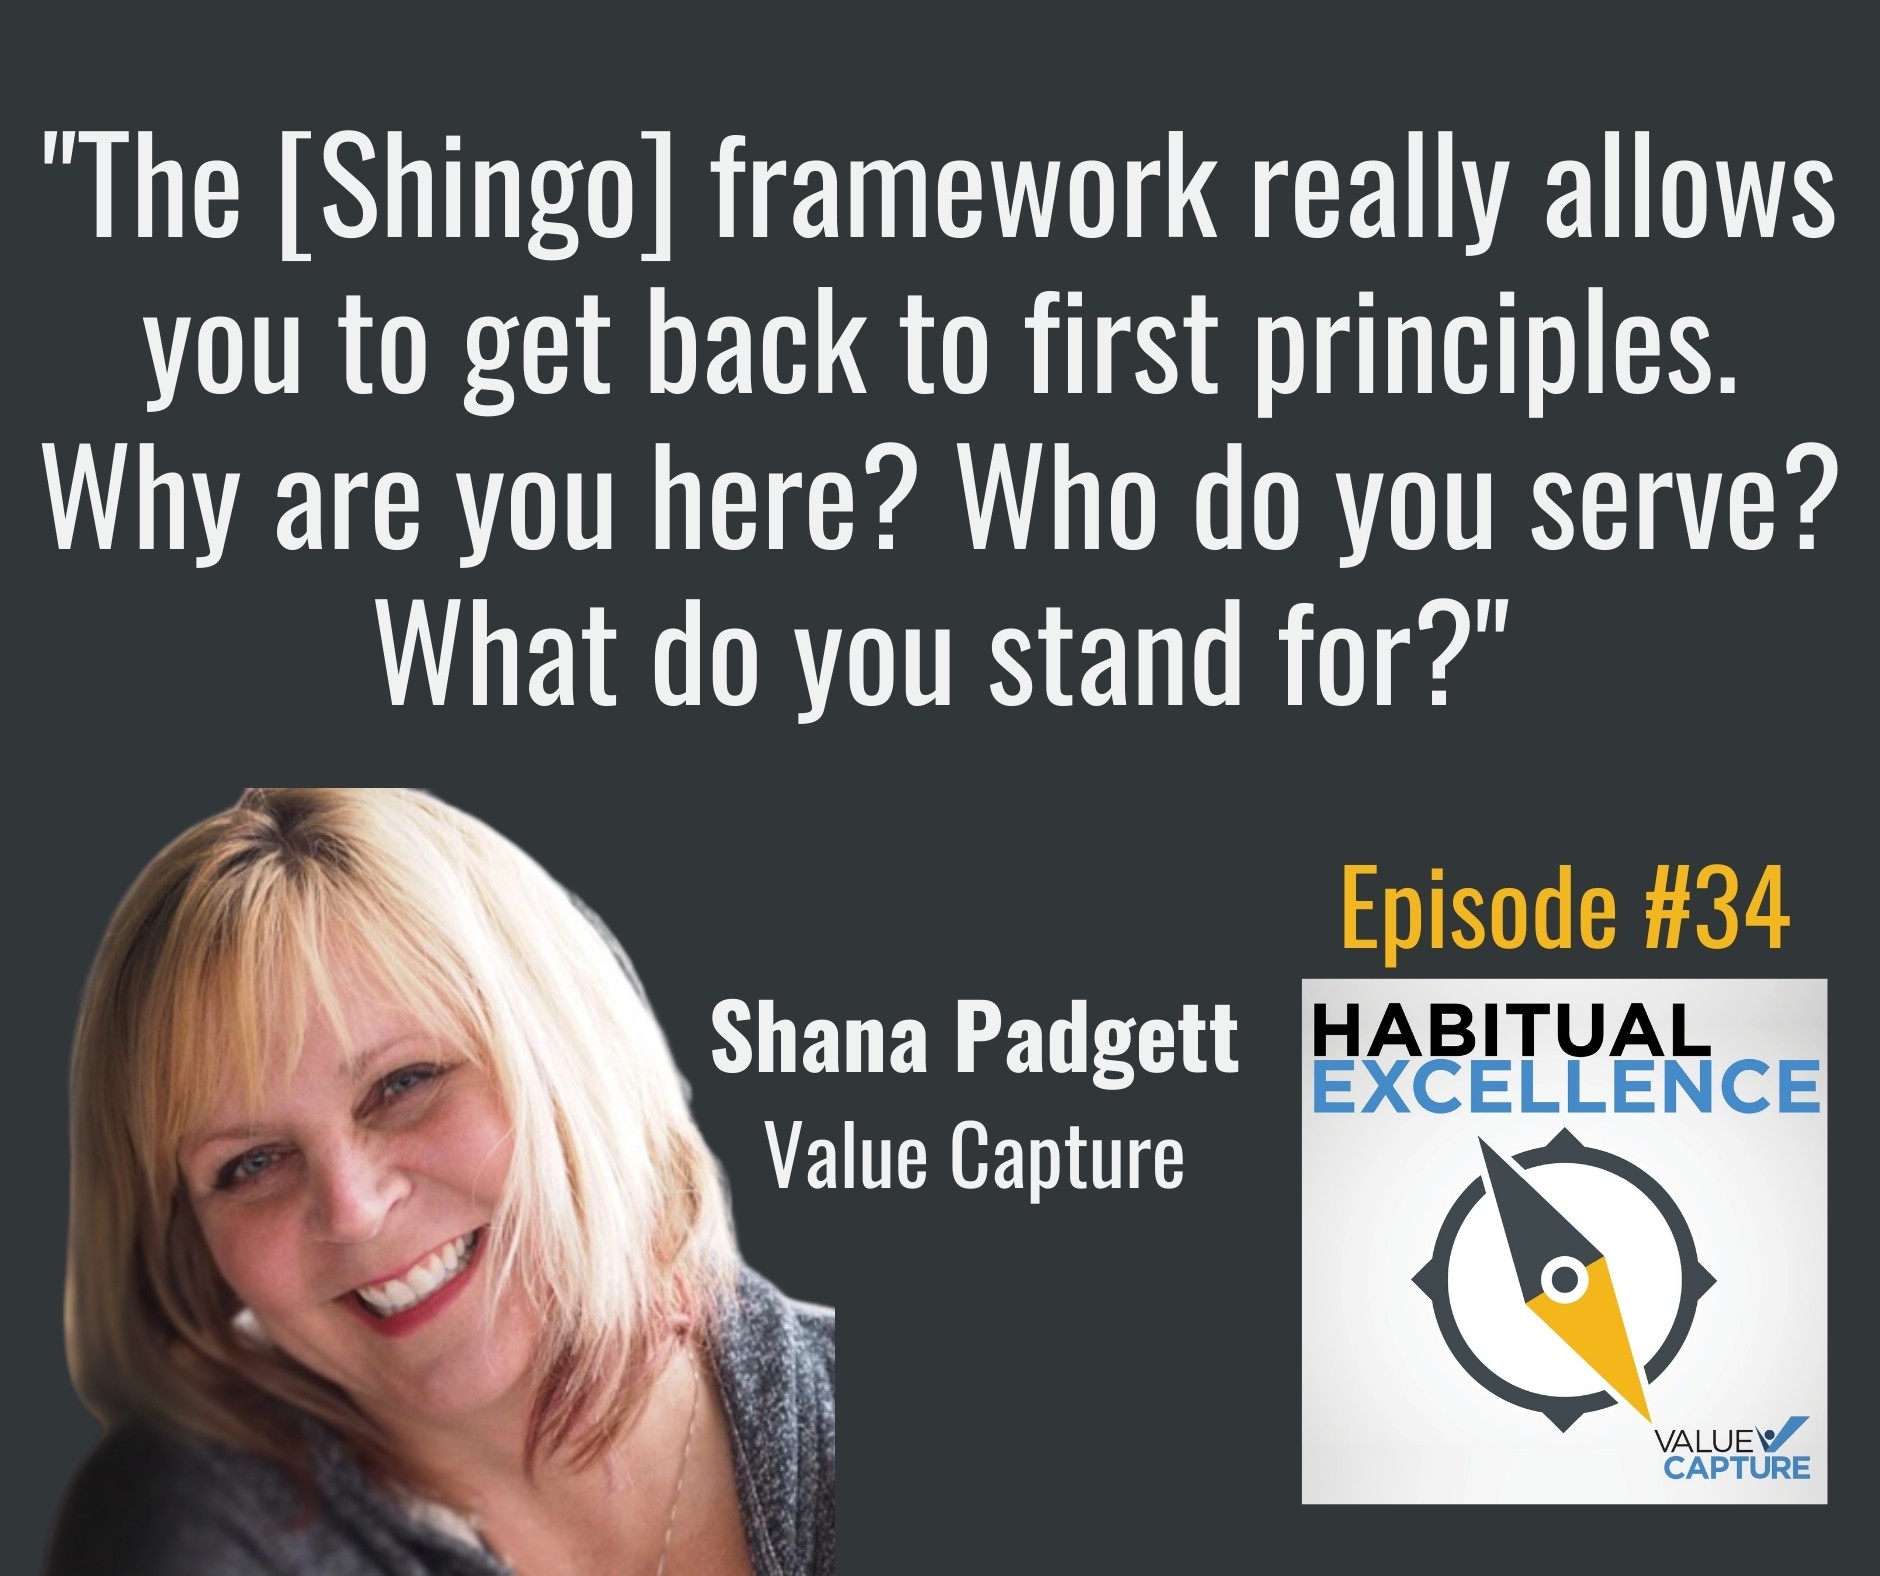 "The [Shingo] framework really allows you to get back to first principles. Why are you here? Who do you serve? What do you stand for?"